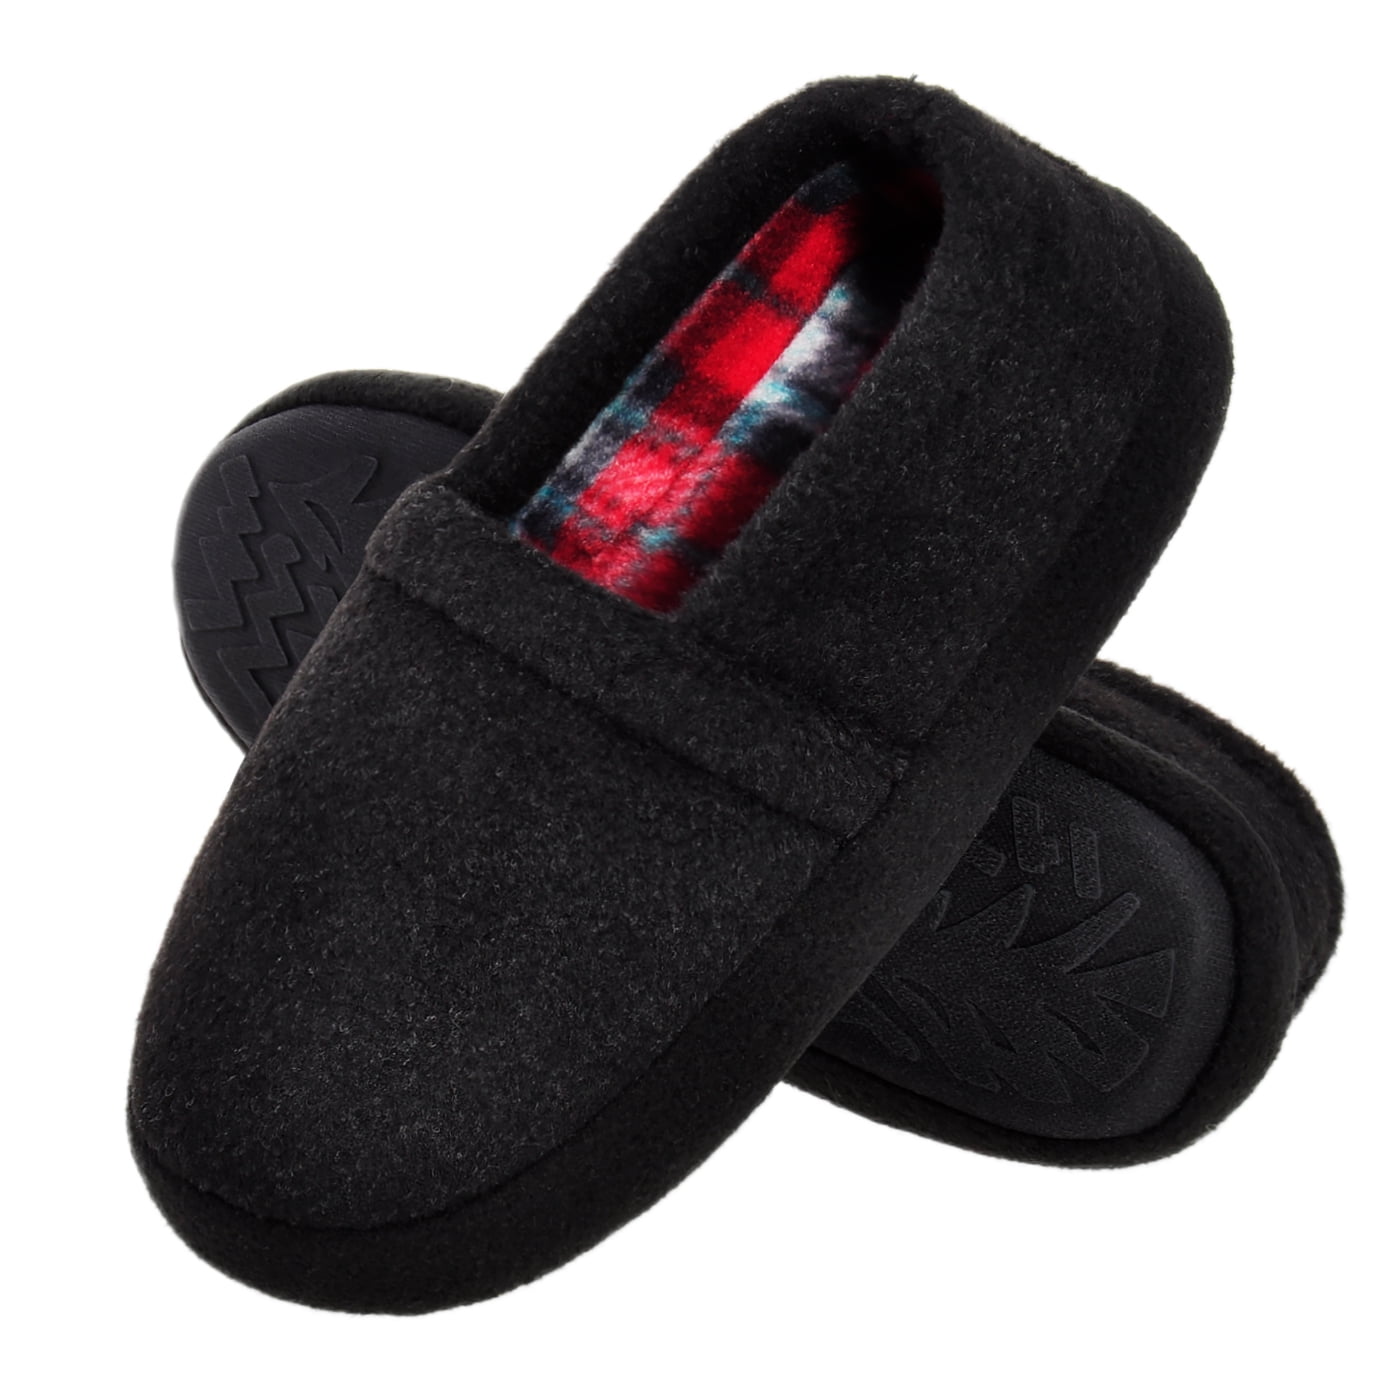 NCCB Kids Boys Slippers Comfy Indoor Outdoor Slippers for little big kids Black size 11 12 5ea28a6d ceab 4ae7 a12c 3d28055591fe.ffd1313a157e81dbf80f5a16963ad994